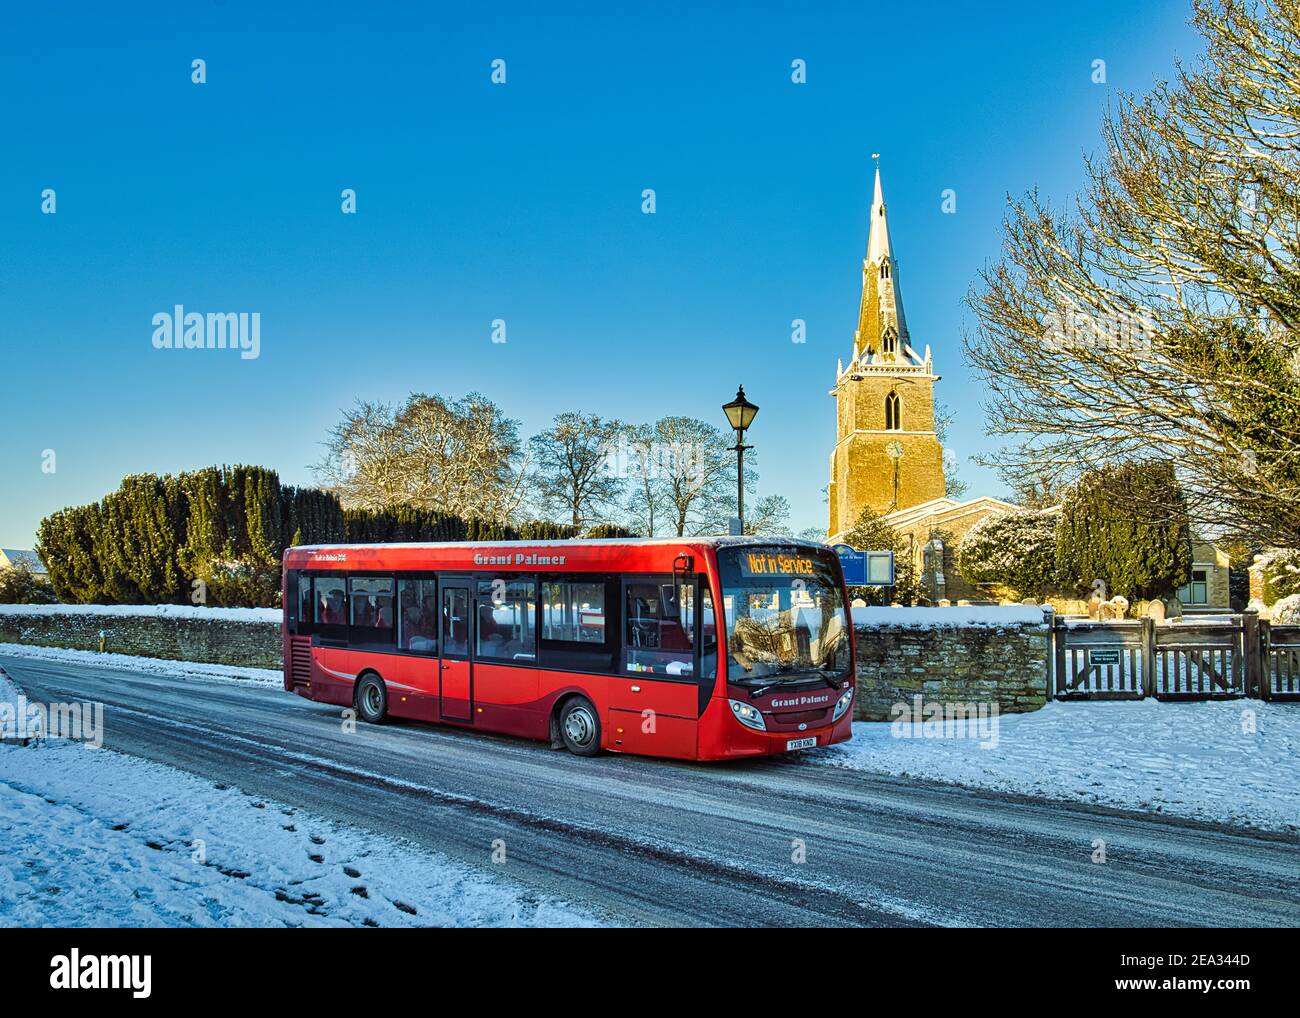 A red bus parked in snow at St Peter's village church, Sharnbrook, Bedfordshire, England, UK Stock Photo